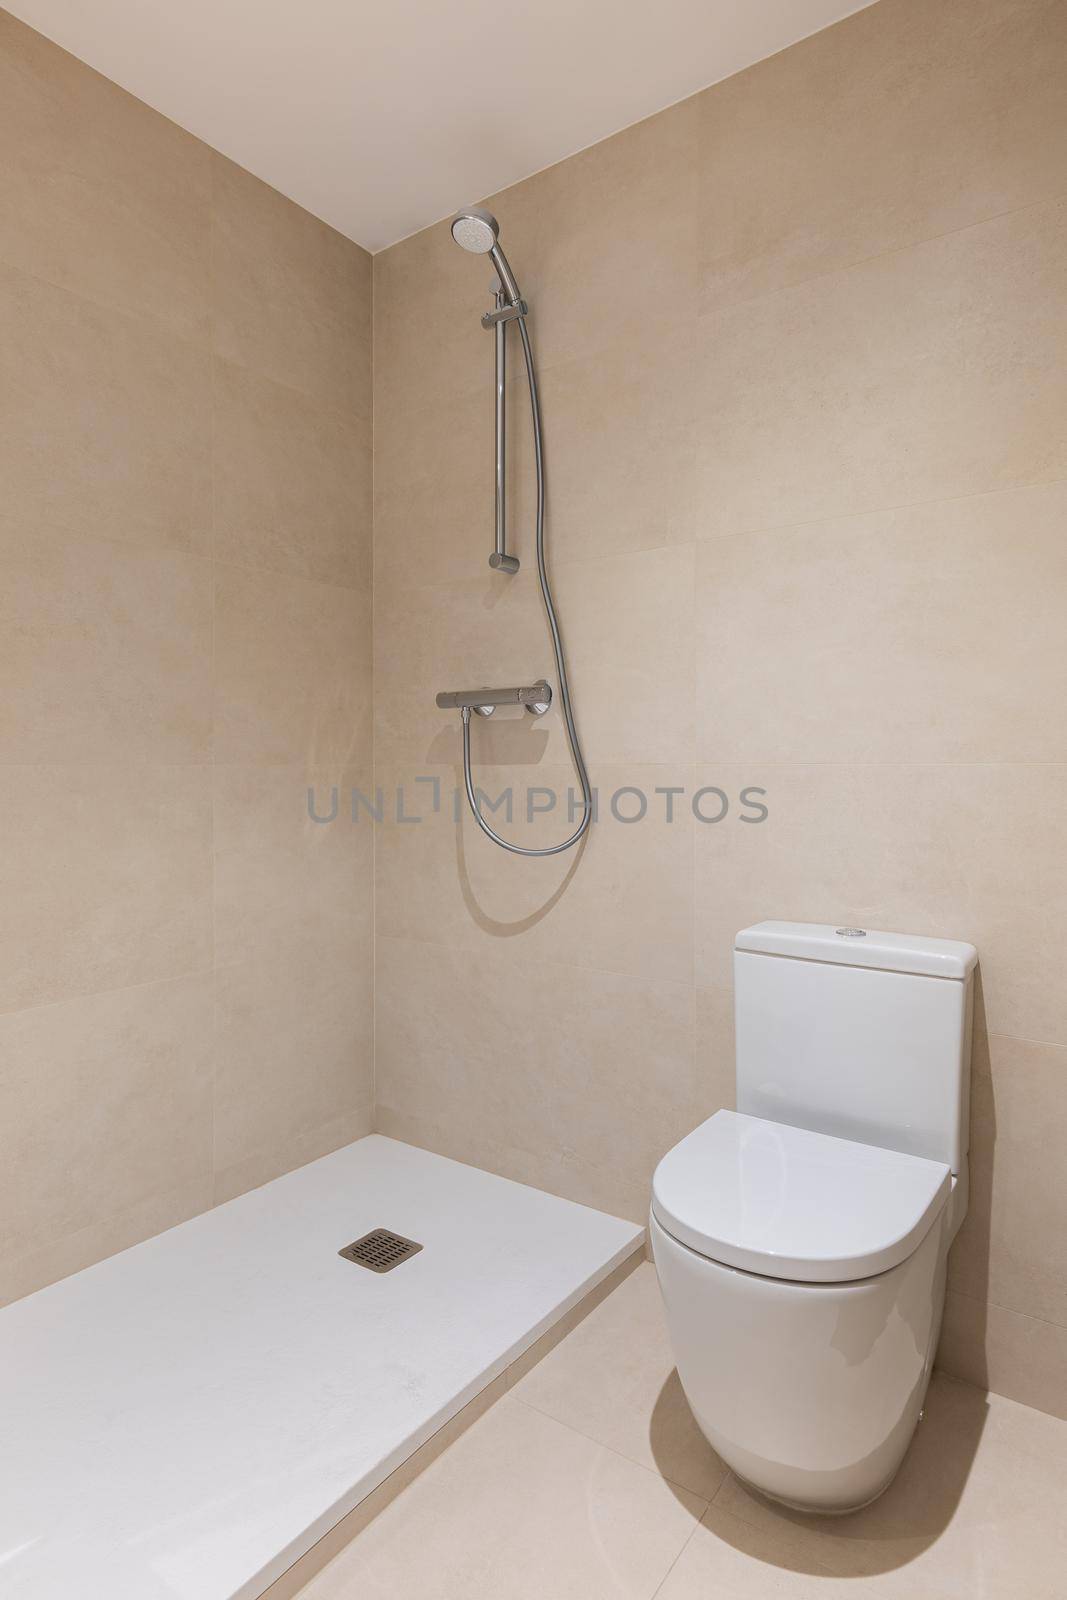 Bathroom with toilet, shower and ceramic tiled wall. Vertical view of modern minimalist interior by apavlin